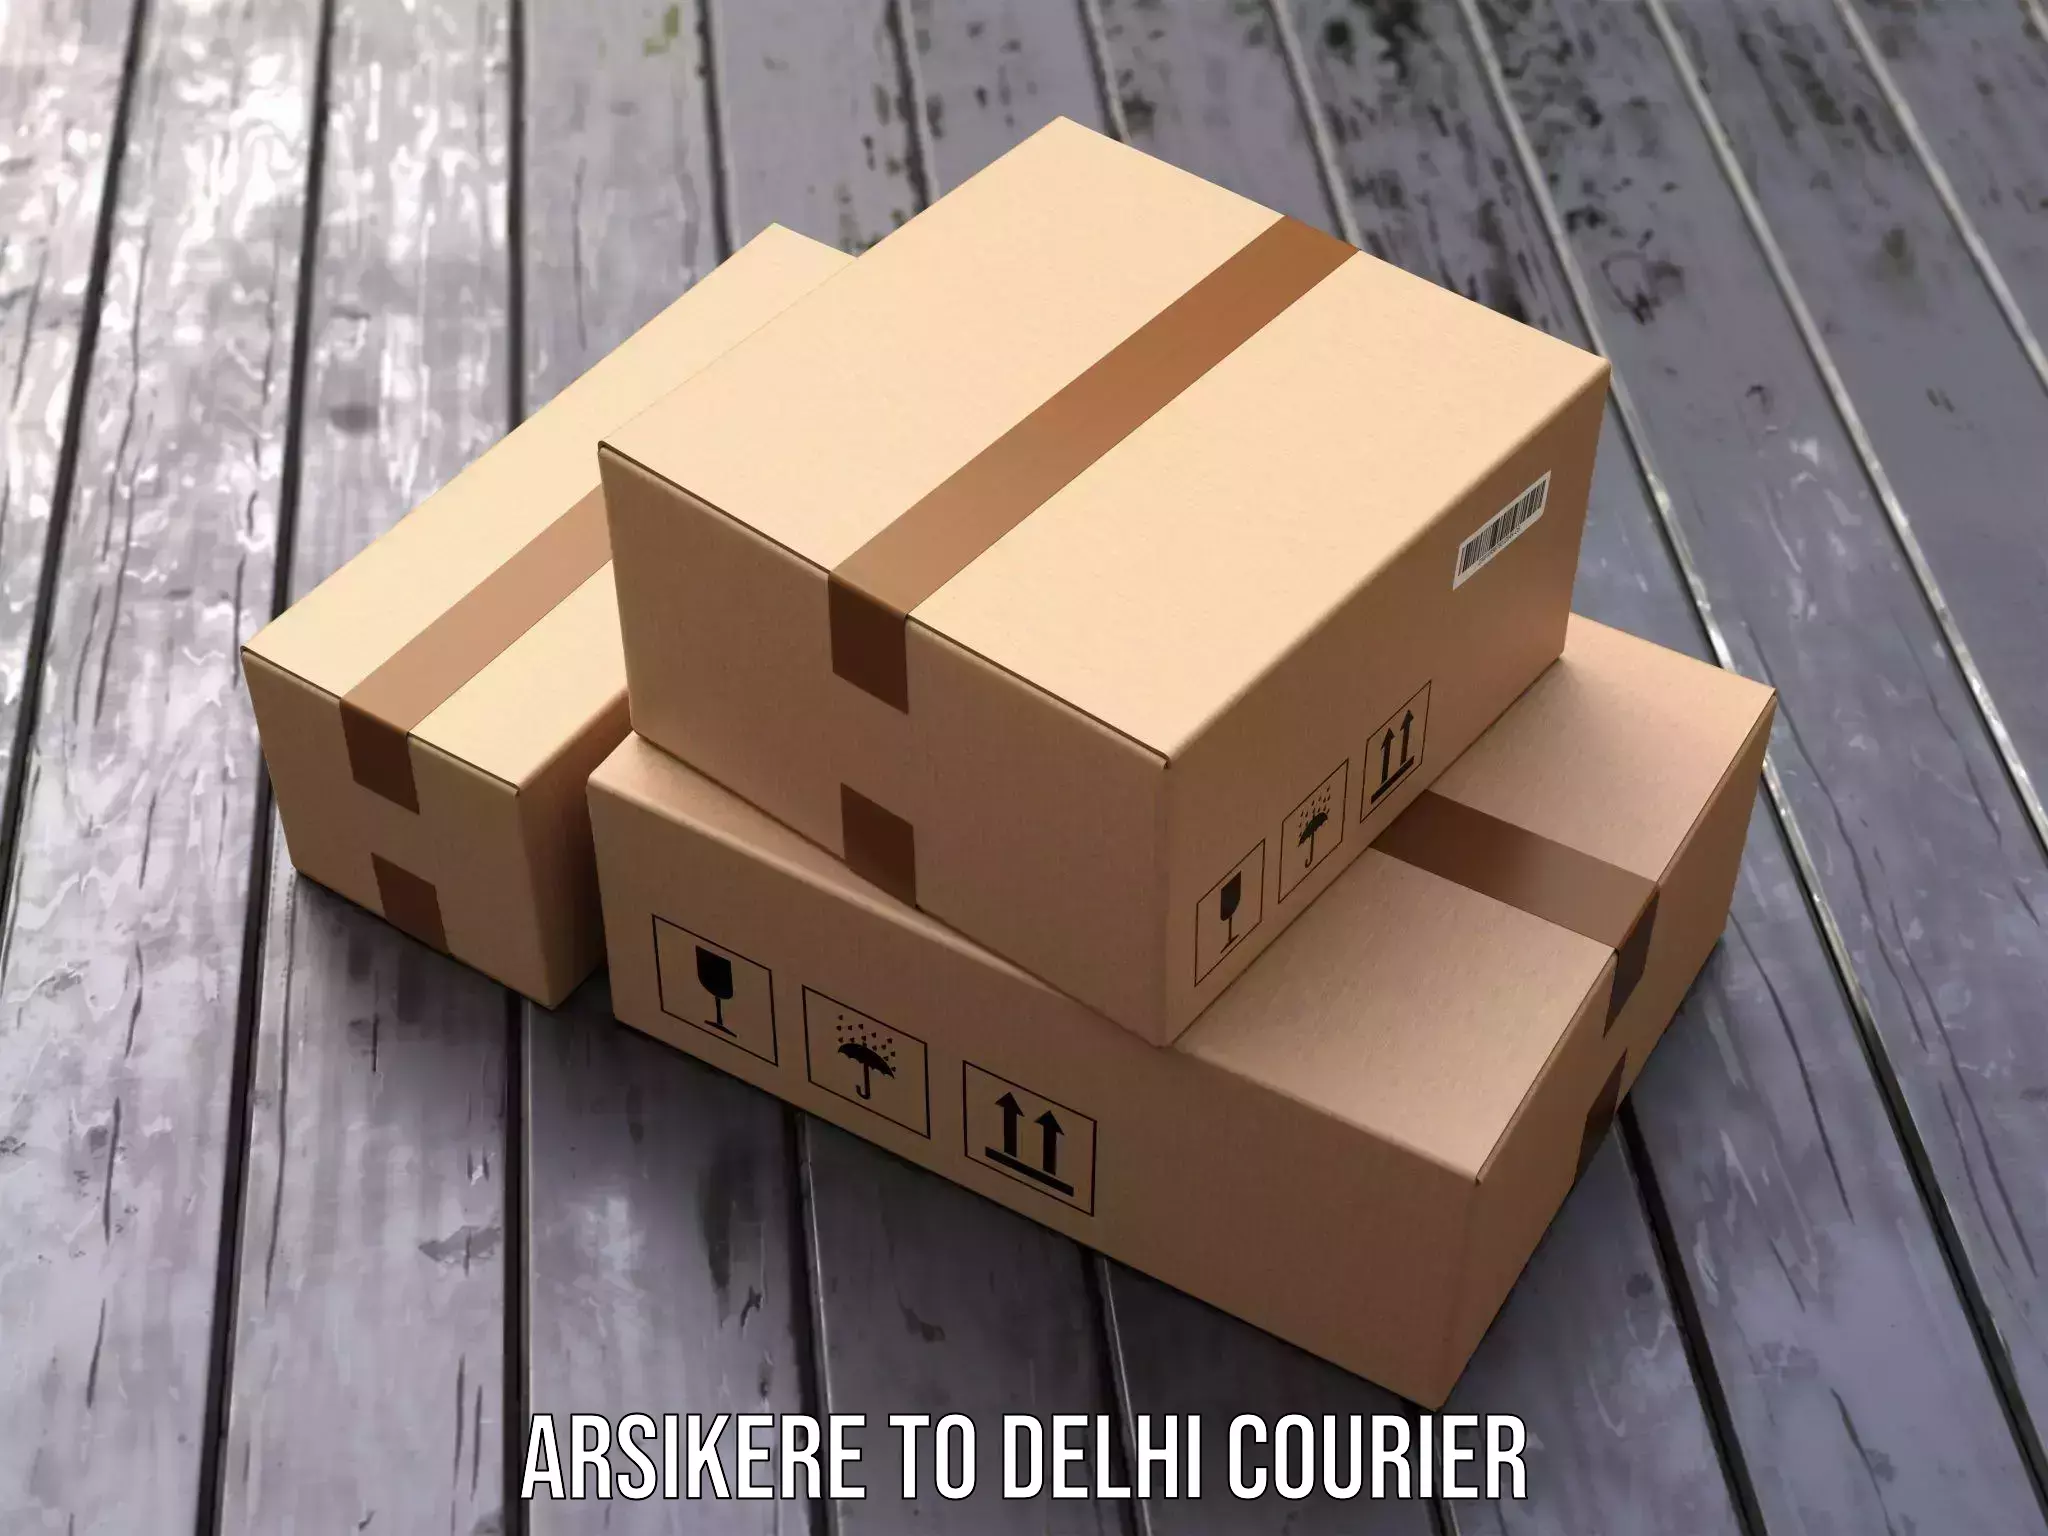 Courier service comparison Arsikere to Indraprastha